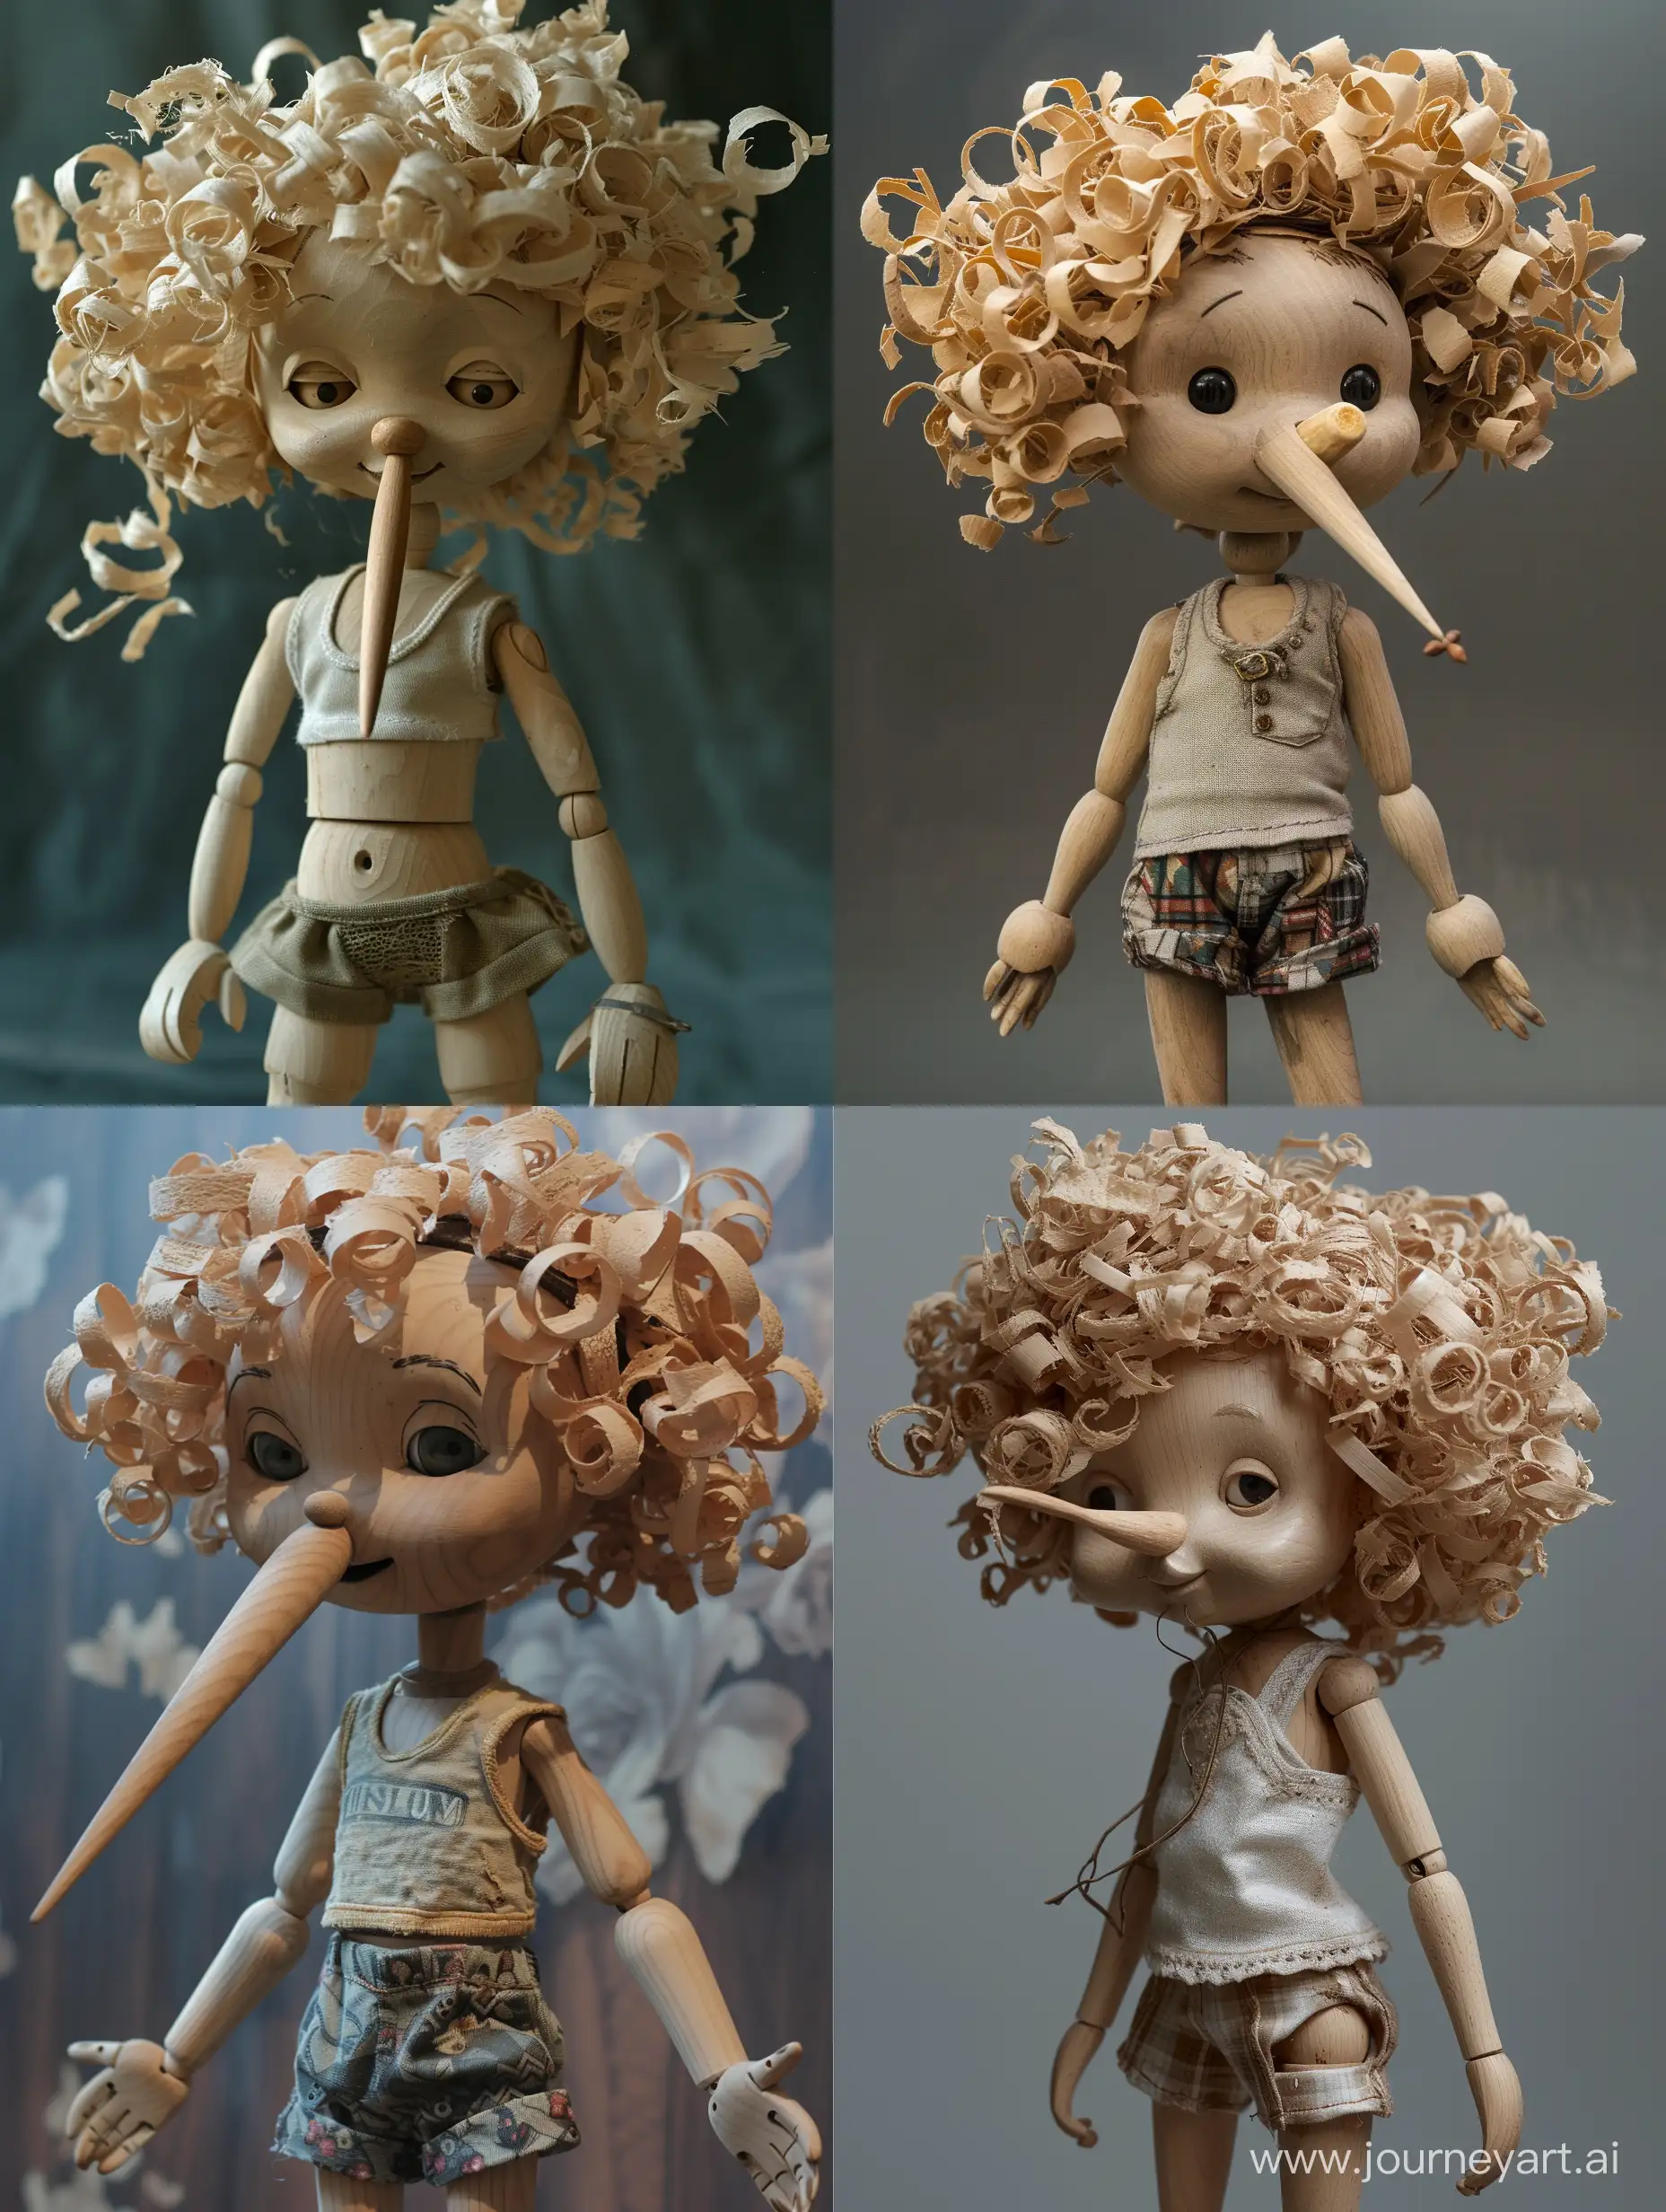 Wooden Pinocchio doll from Carlo Collodi (Le avventure di Pinocchio). Pinocchio is in character as a girl in a tank top and shorts. Pinocchio is feminine. Pinocchio-girl with a very long wooden nose like Pinocchio-boy. Curly hair made of wood shavings 